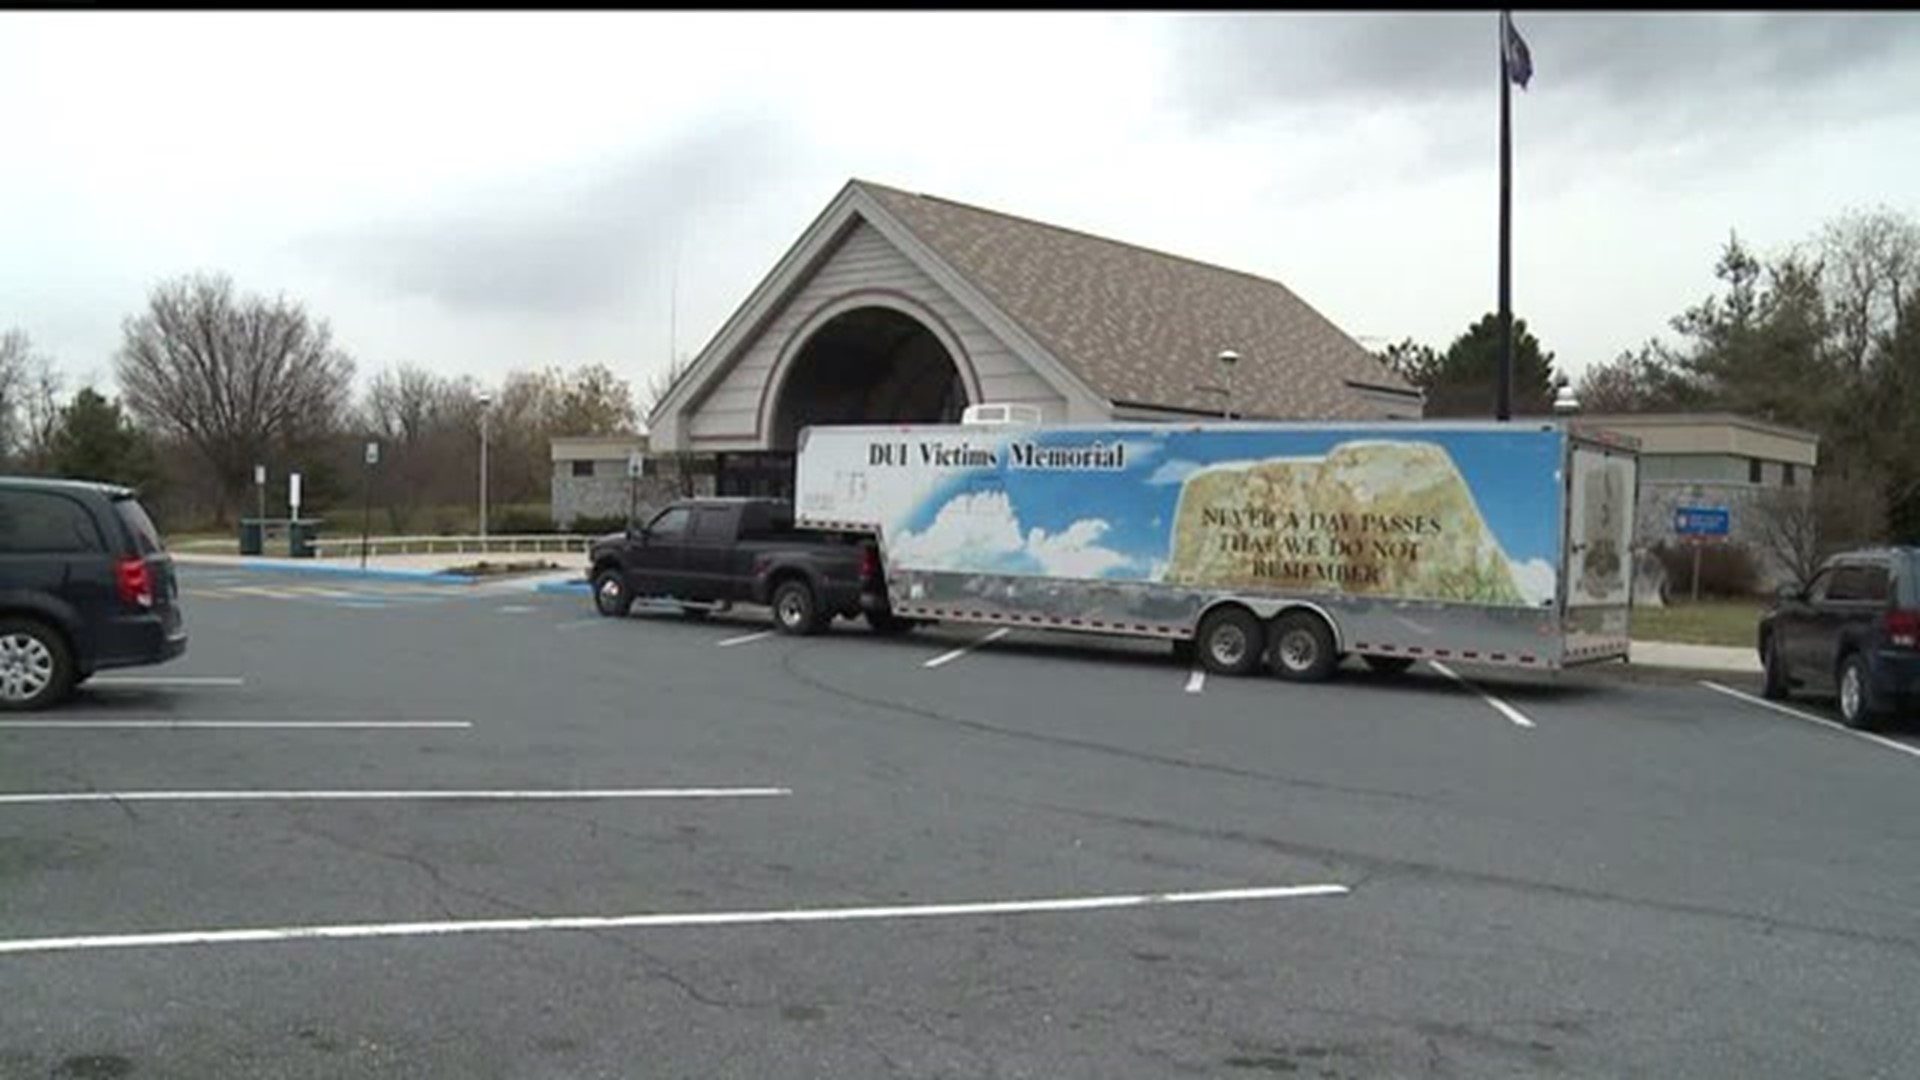 Mobile memorial honors DUI victims at I-81 Welcome Center